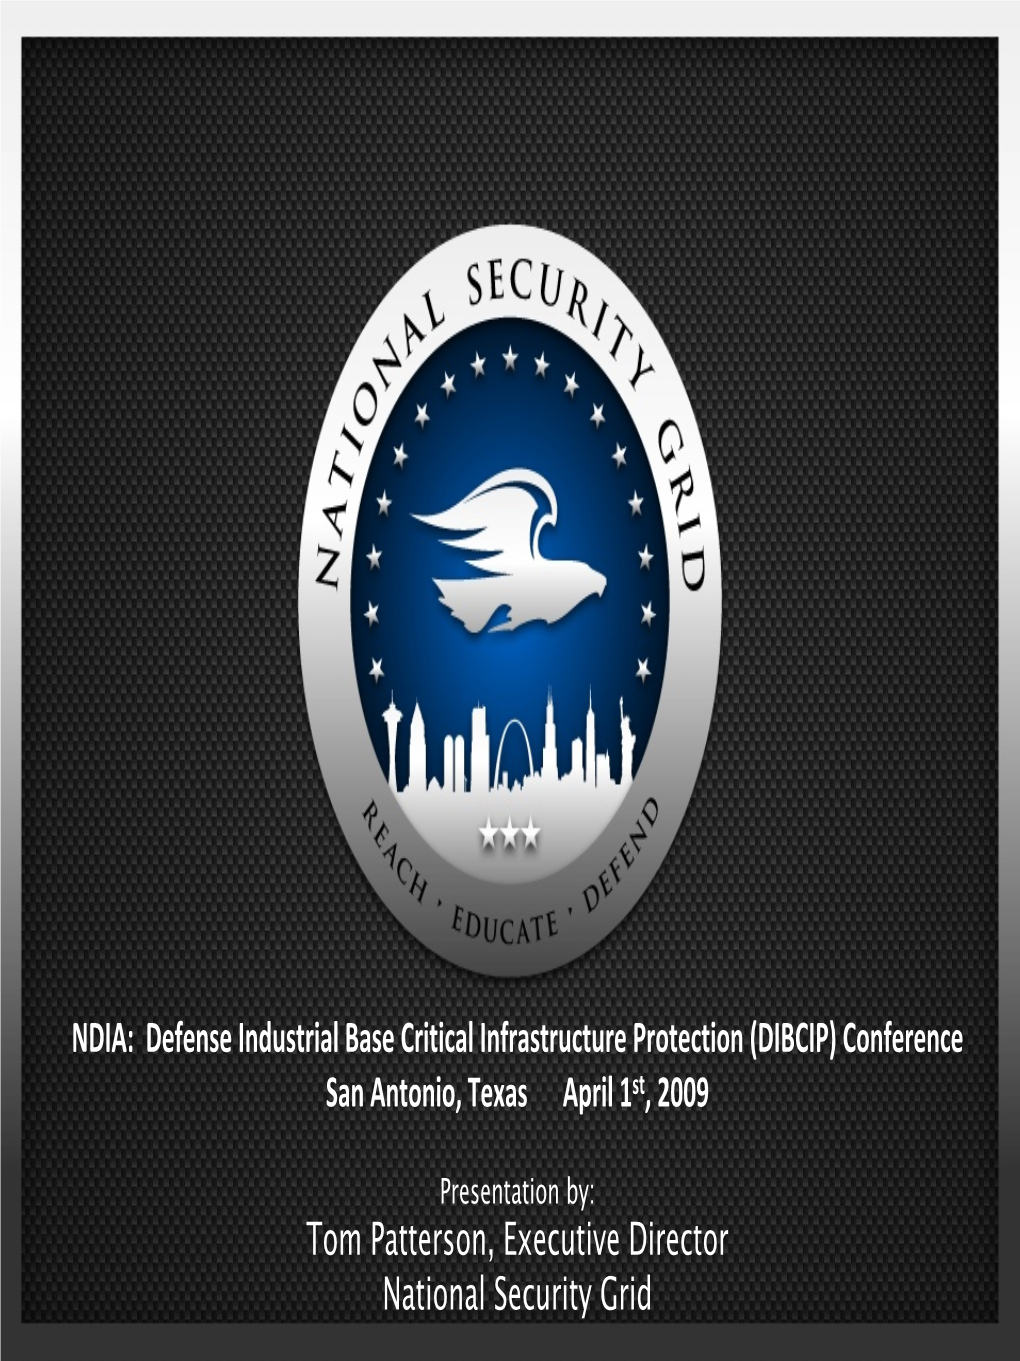 NDIA: Defense Industrial Base Critical Infrastructure Protection (DIBCIP) Conference San Antonio, Texas April 1St, 2009